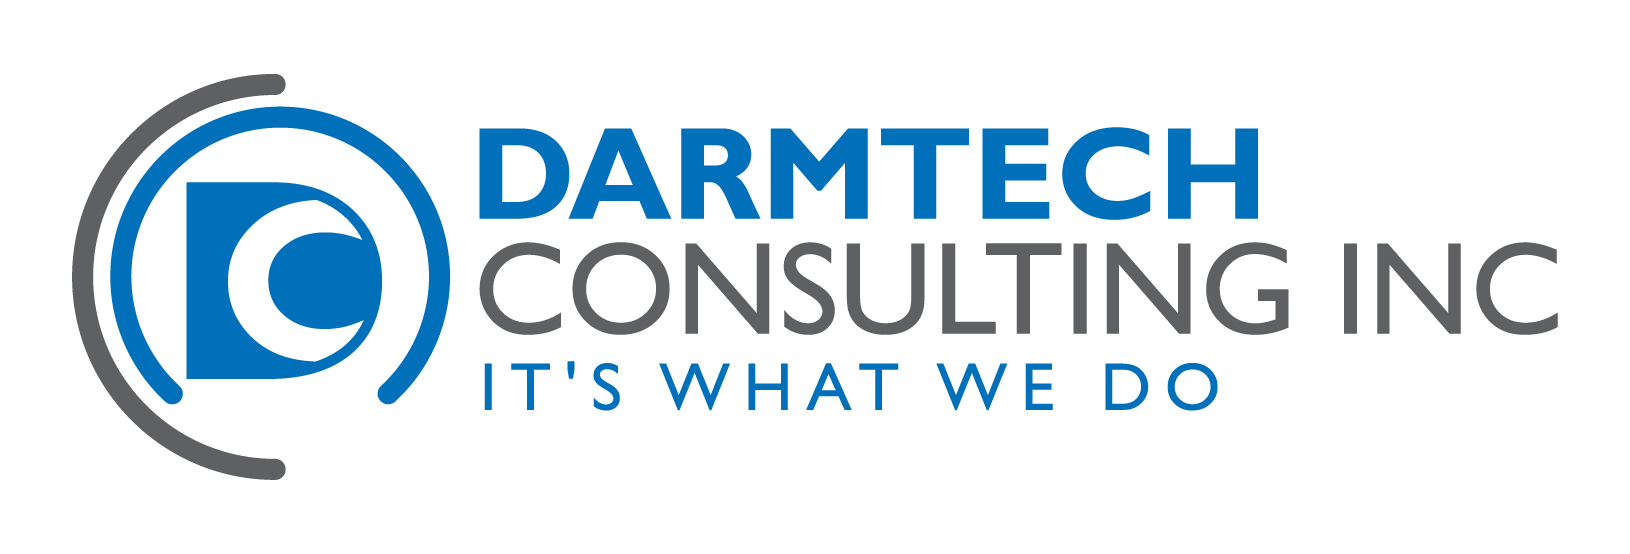 DARMTECH Consulting Inc. | Network Solutions